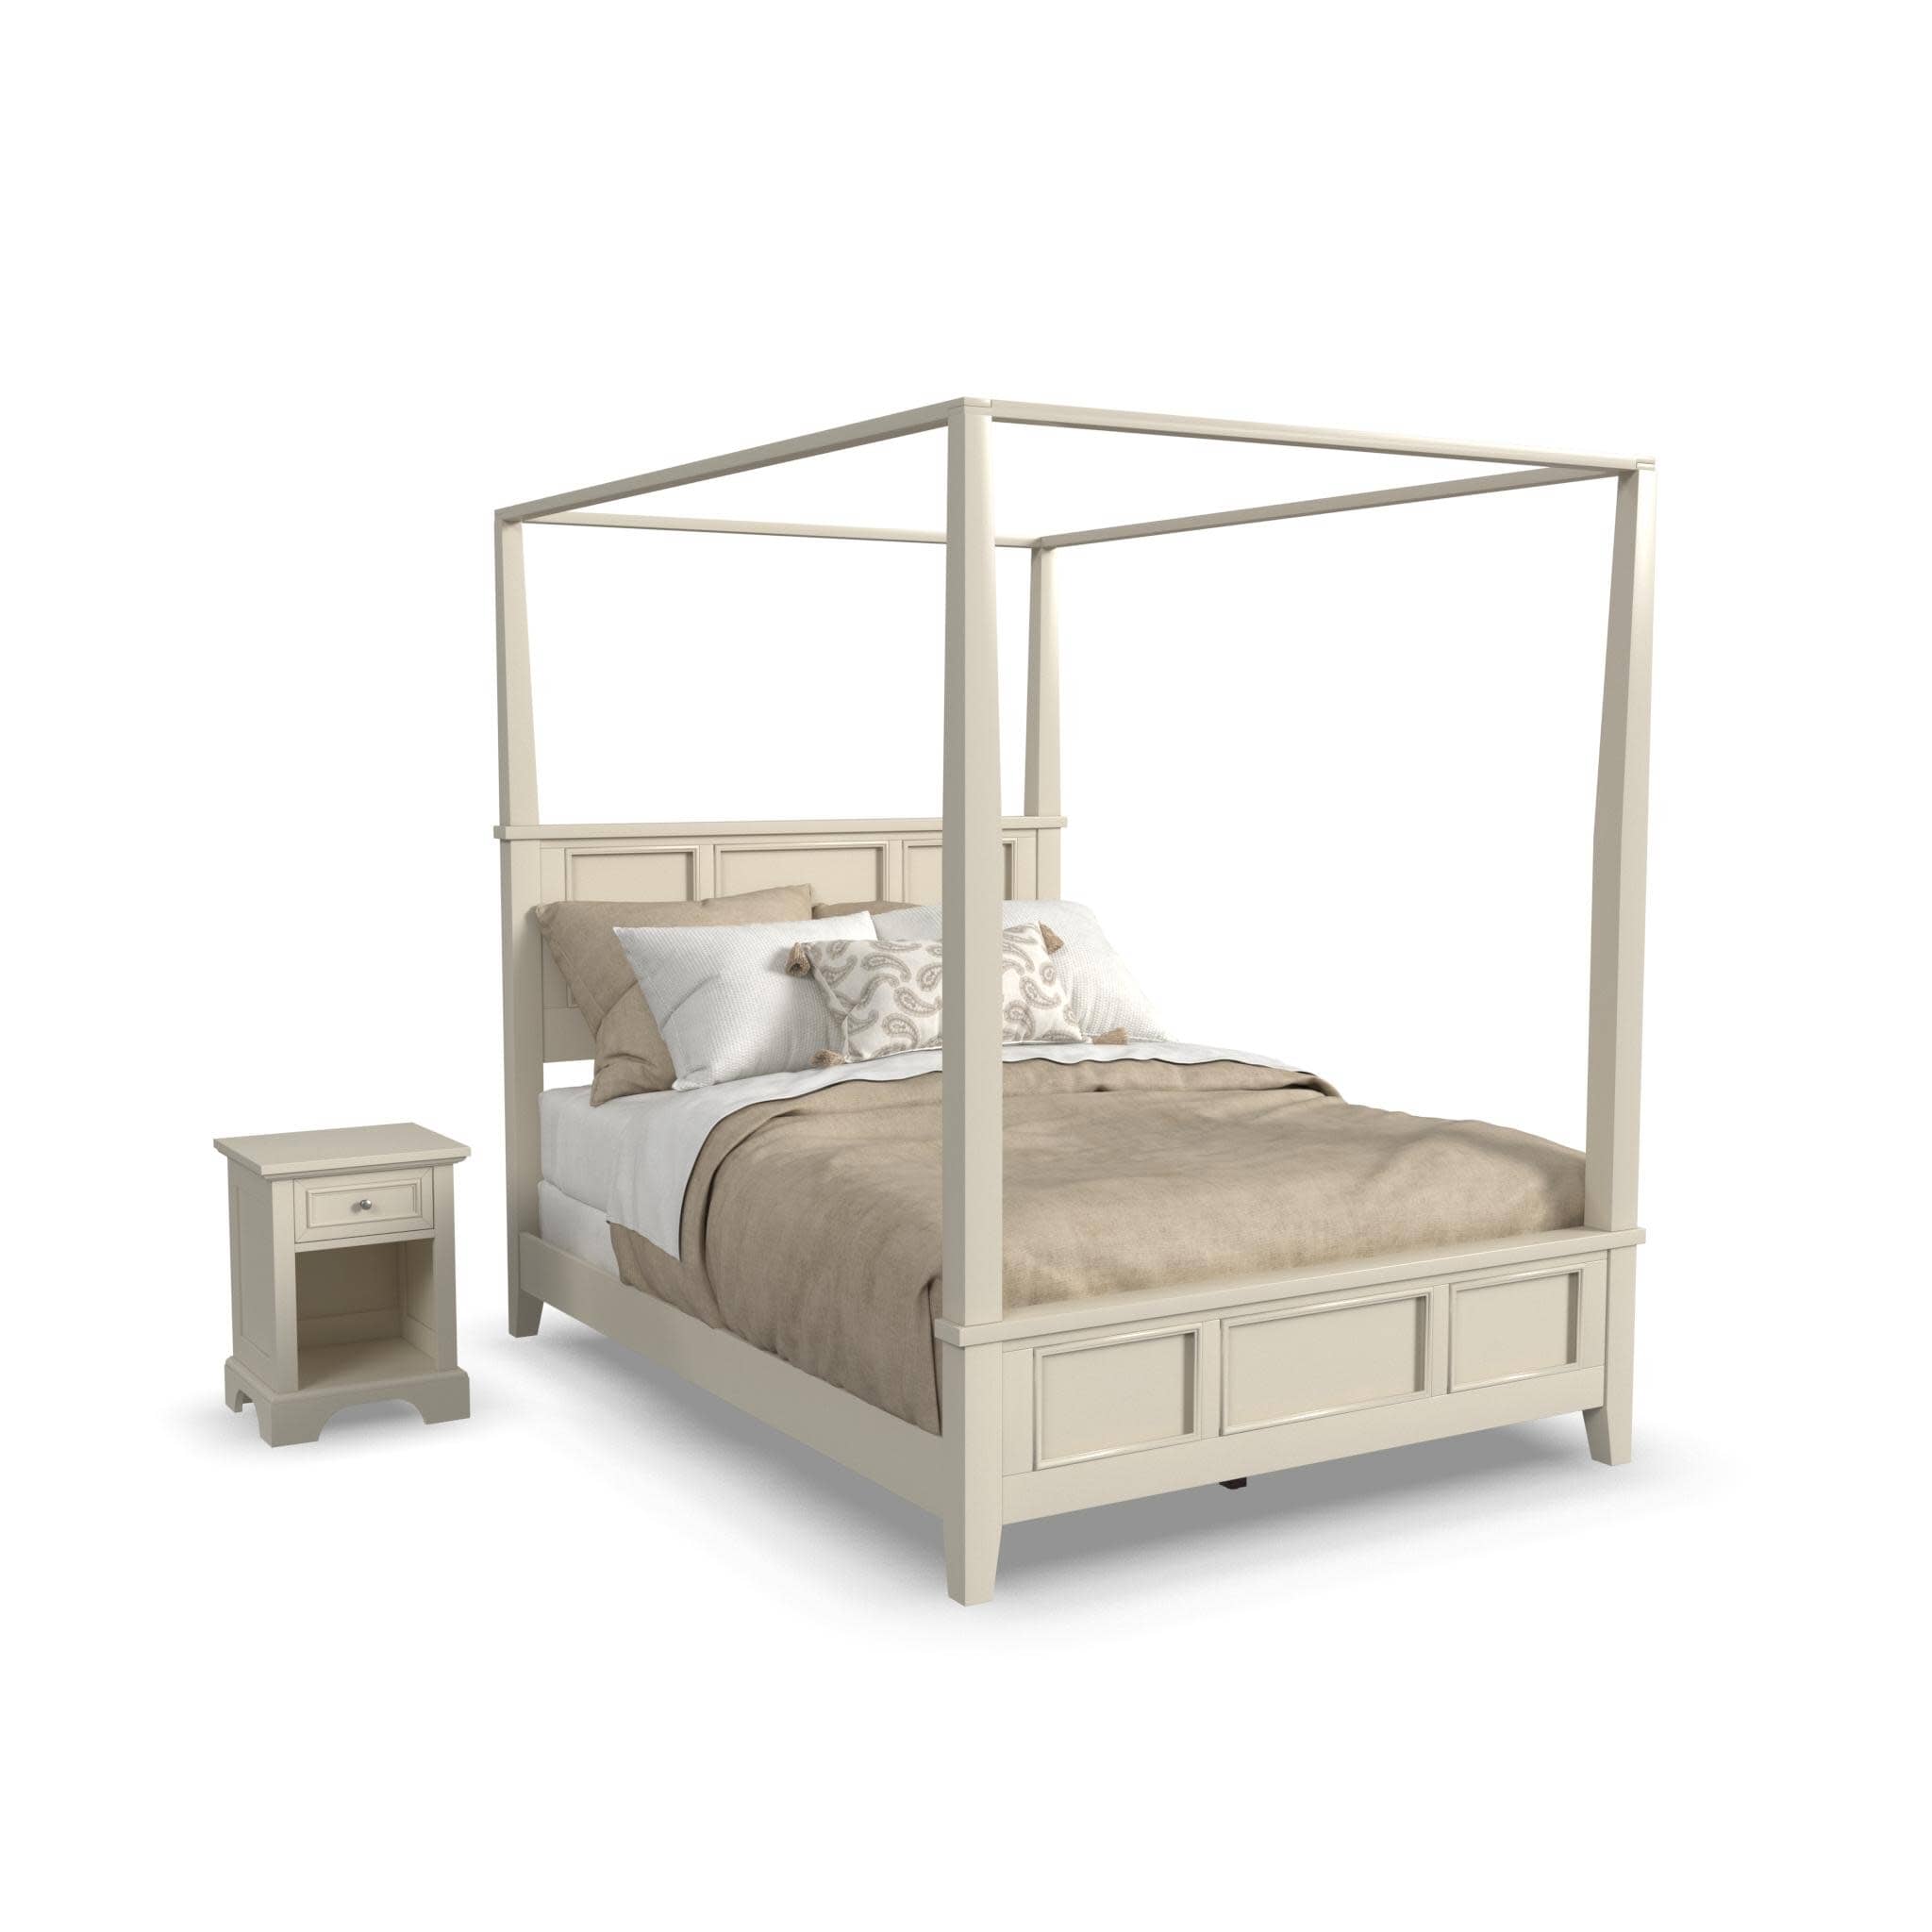 Traditional Queen Bed and Nightstand By Naples Queen Bed Naples